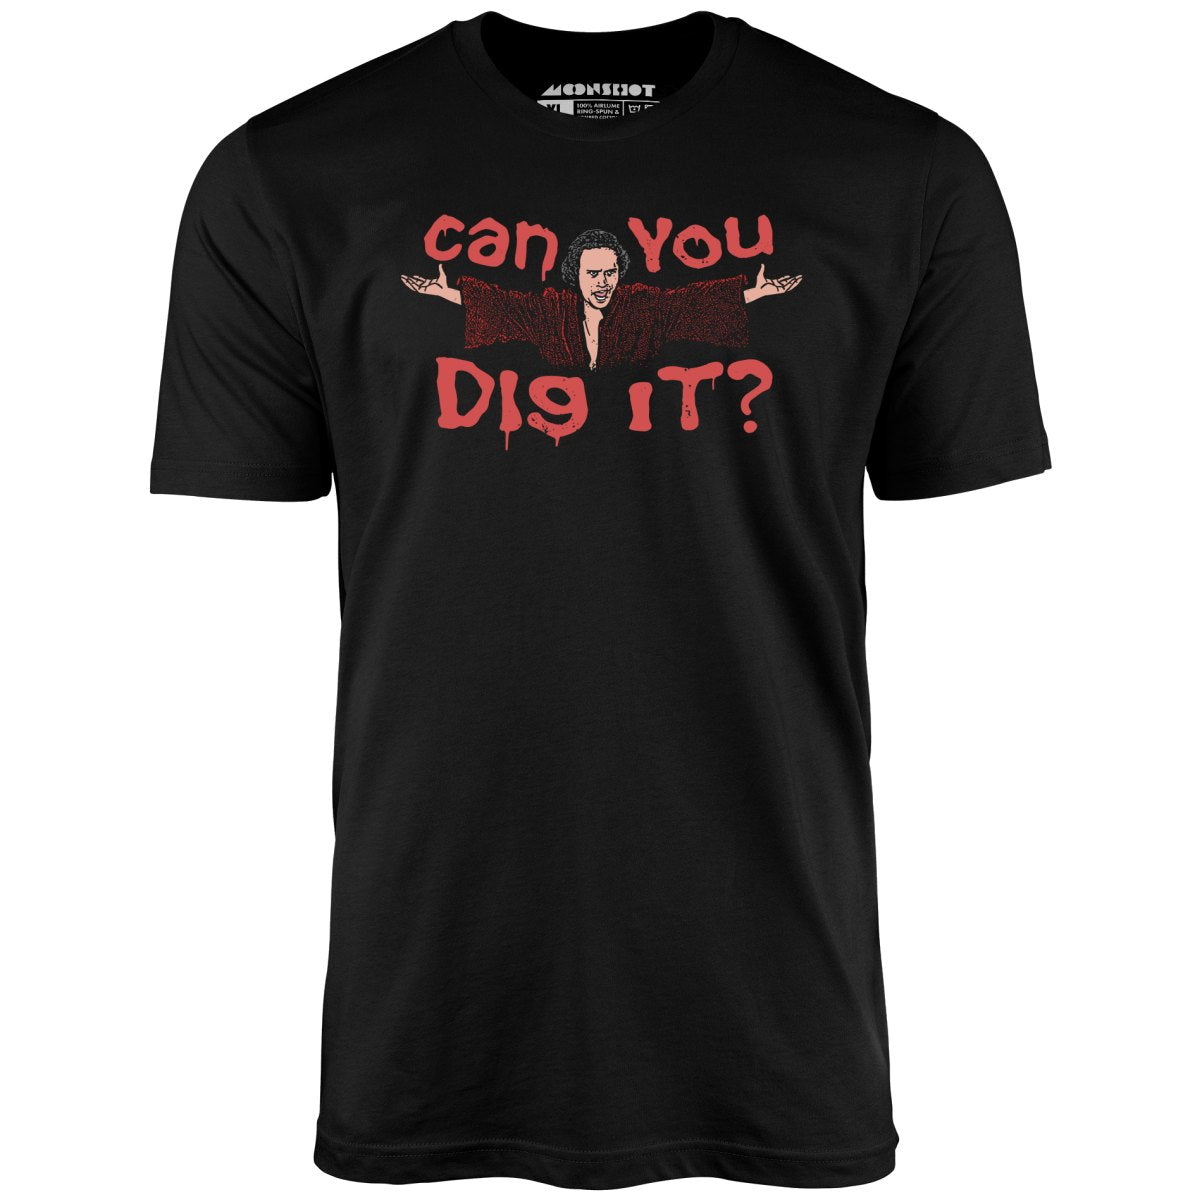 Can You Dig It? - Unisex T-Shirt